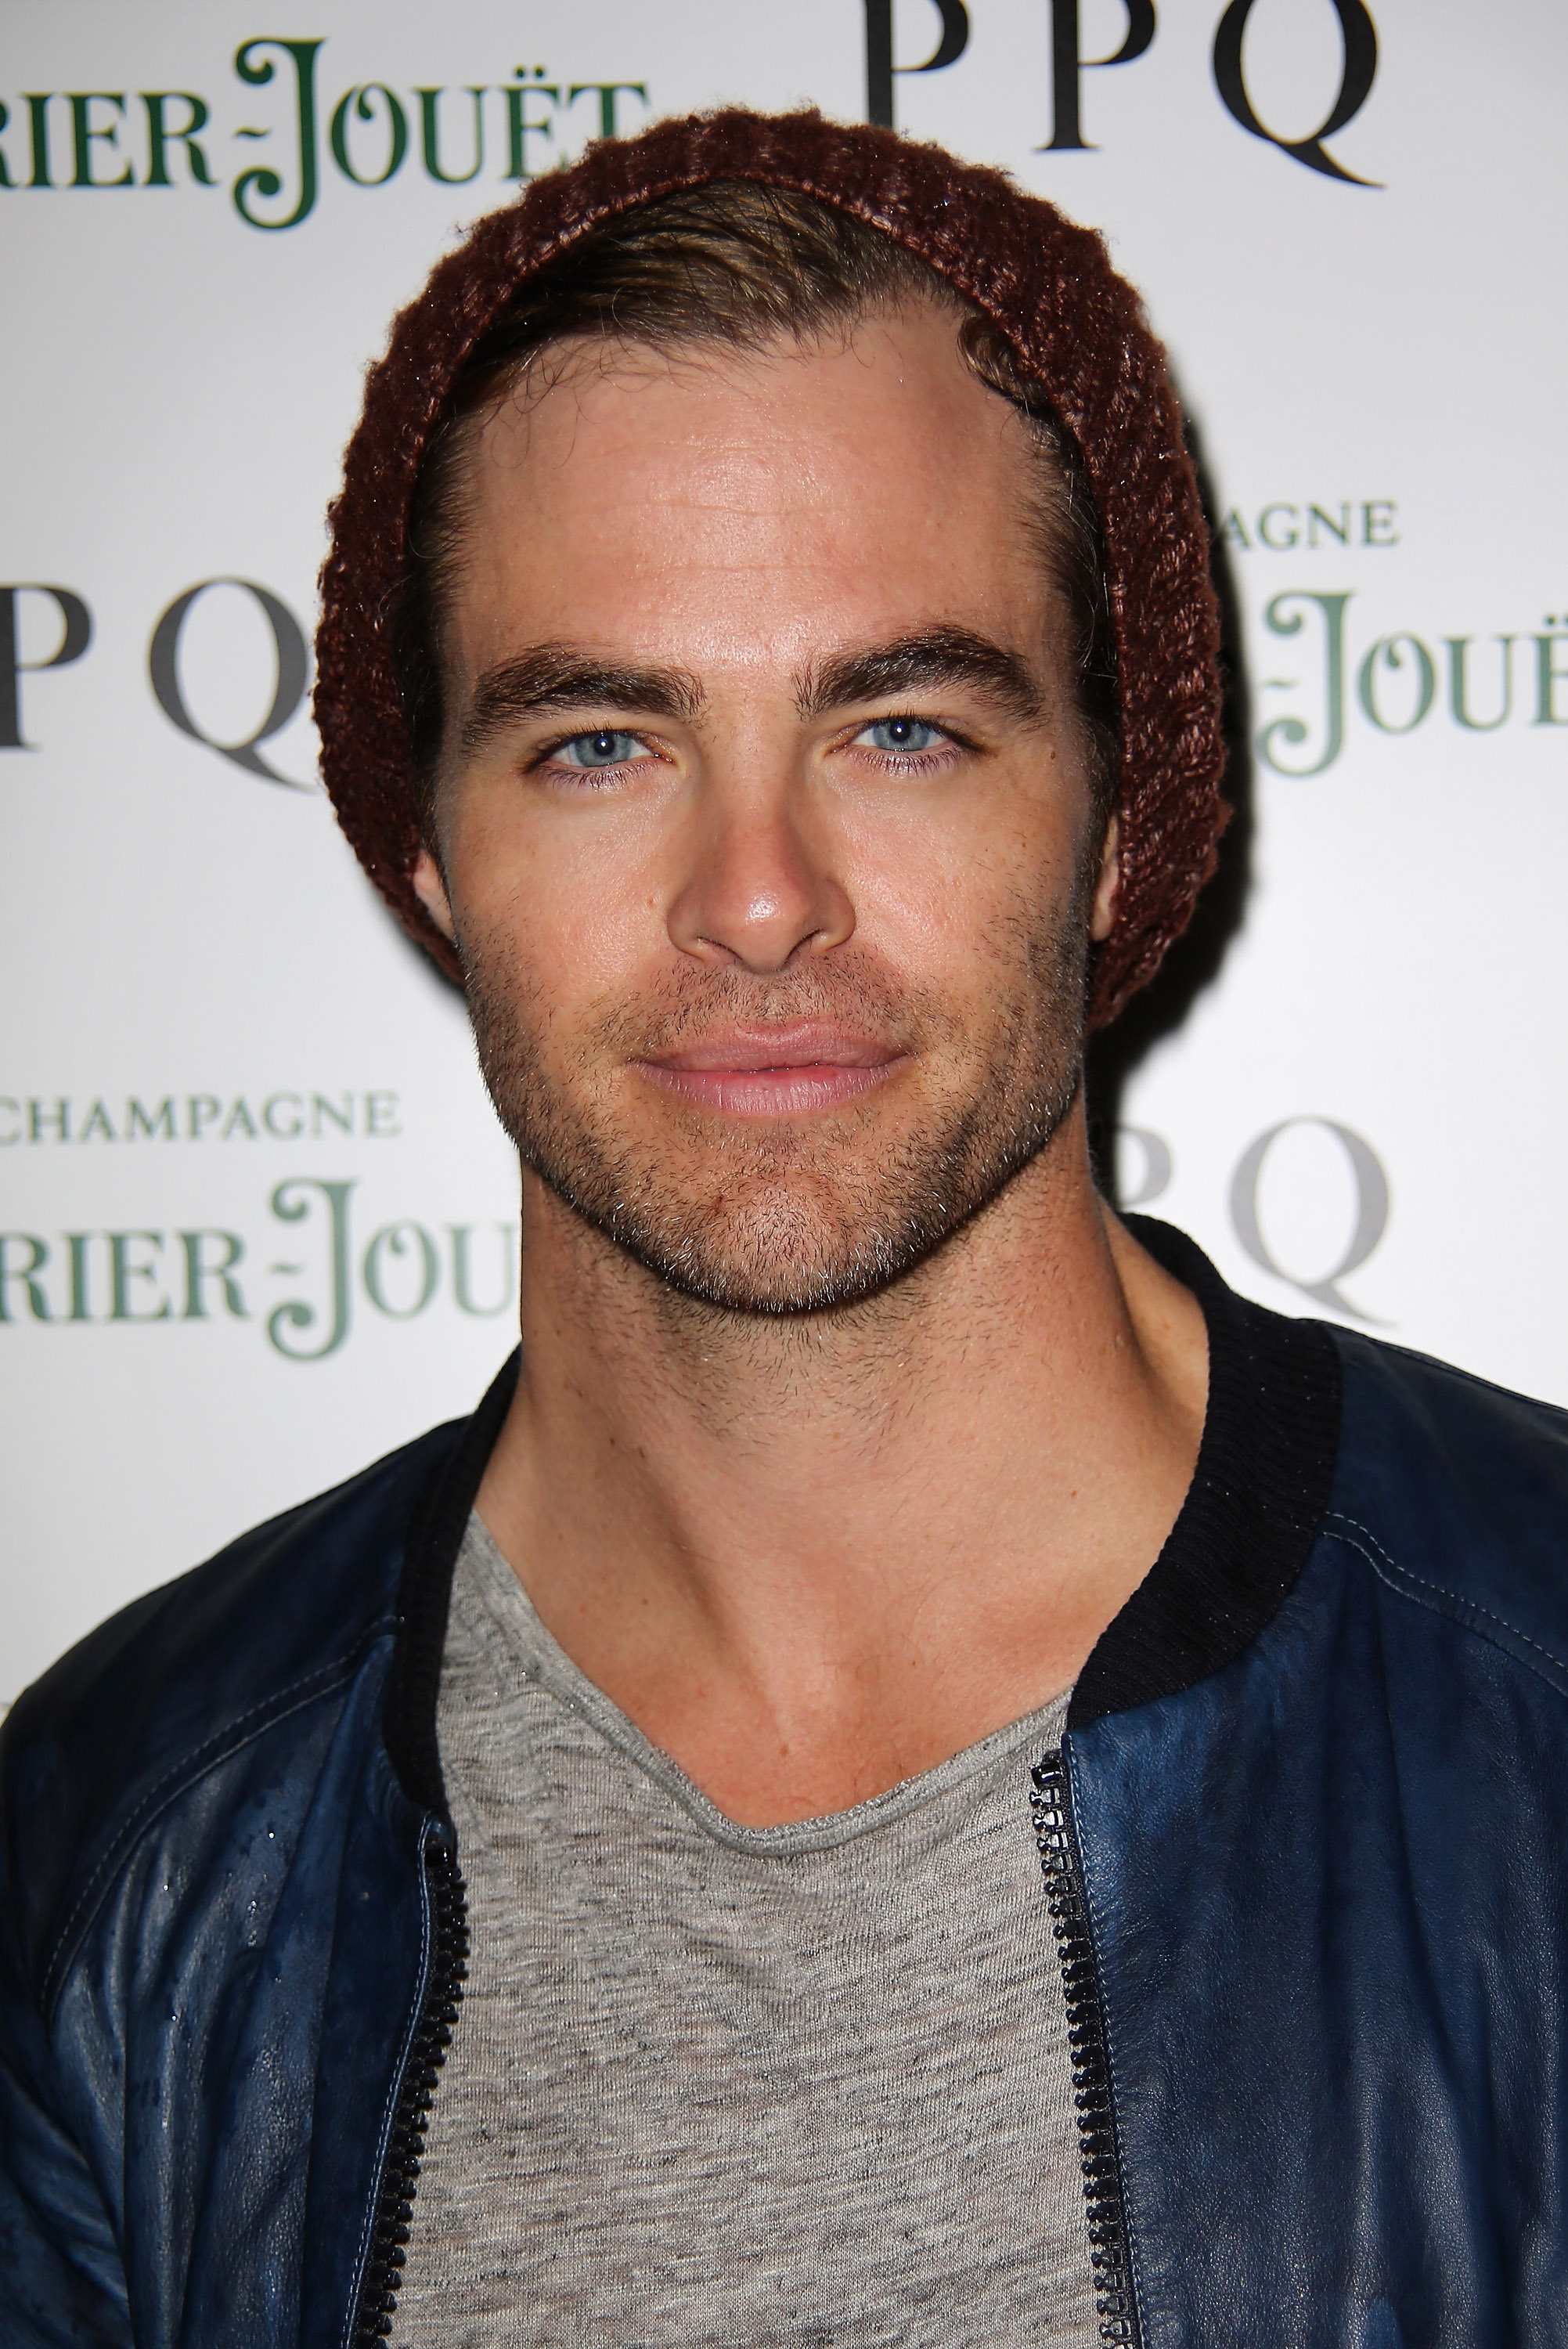 Chris Pine attends the PPQ Spring/Summer 2014 after show party on September 13, 2013 in London, England. | Source: Getty Images